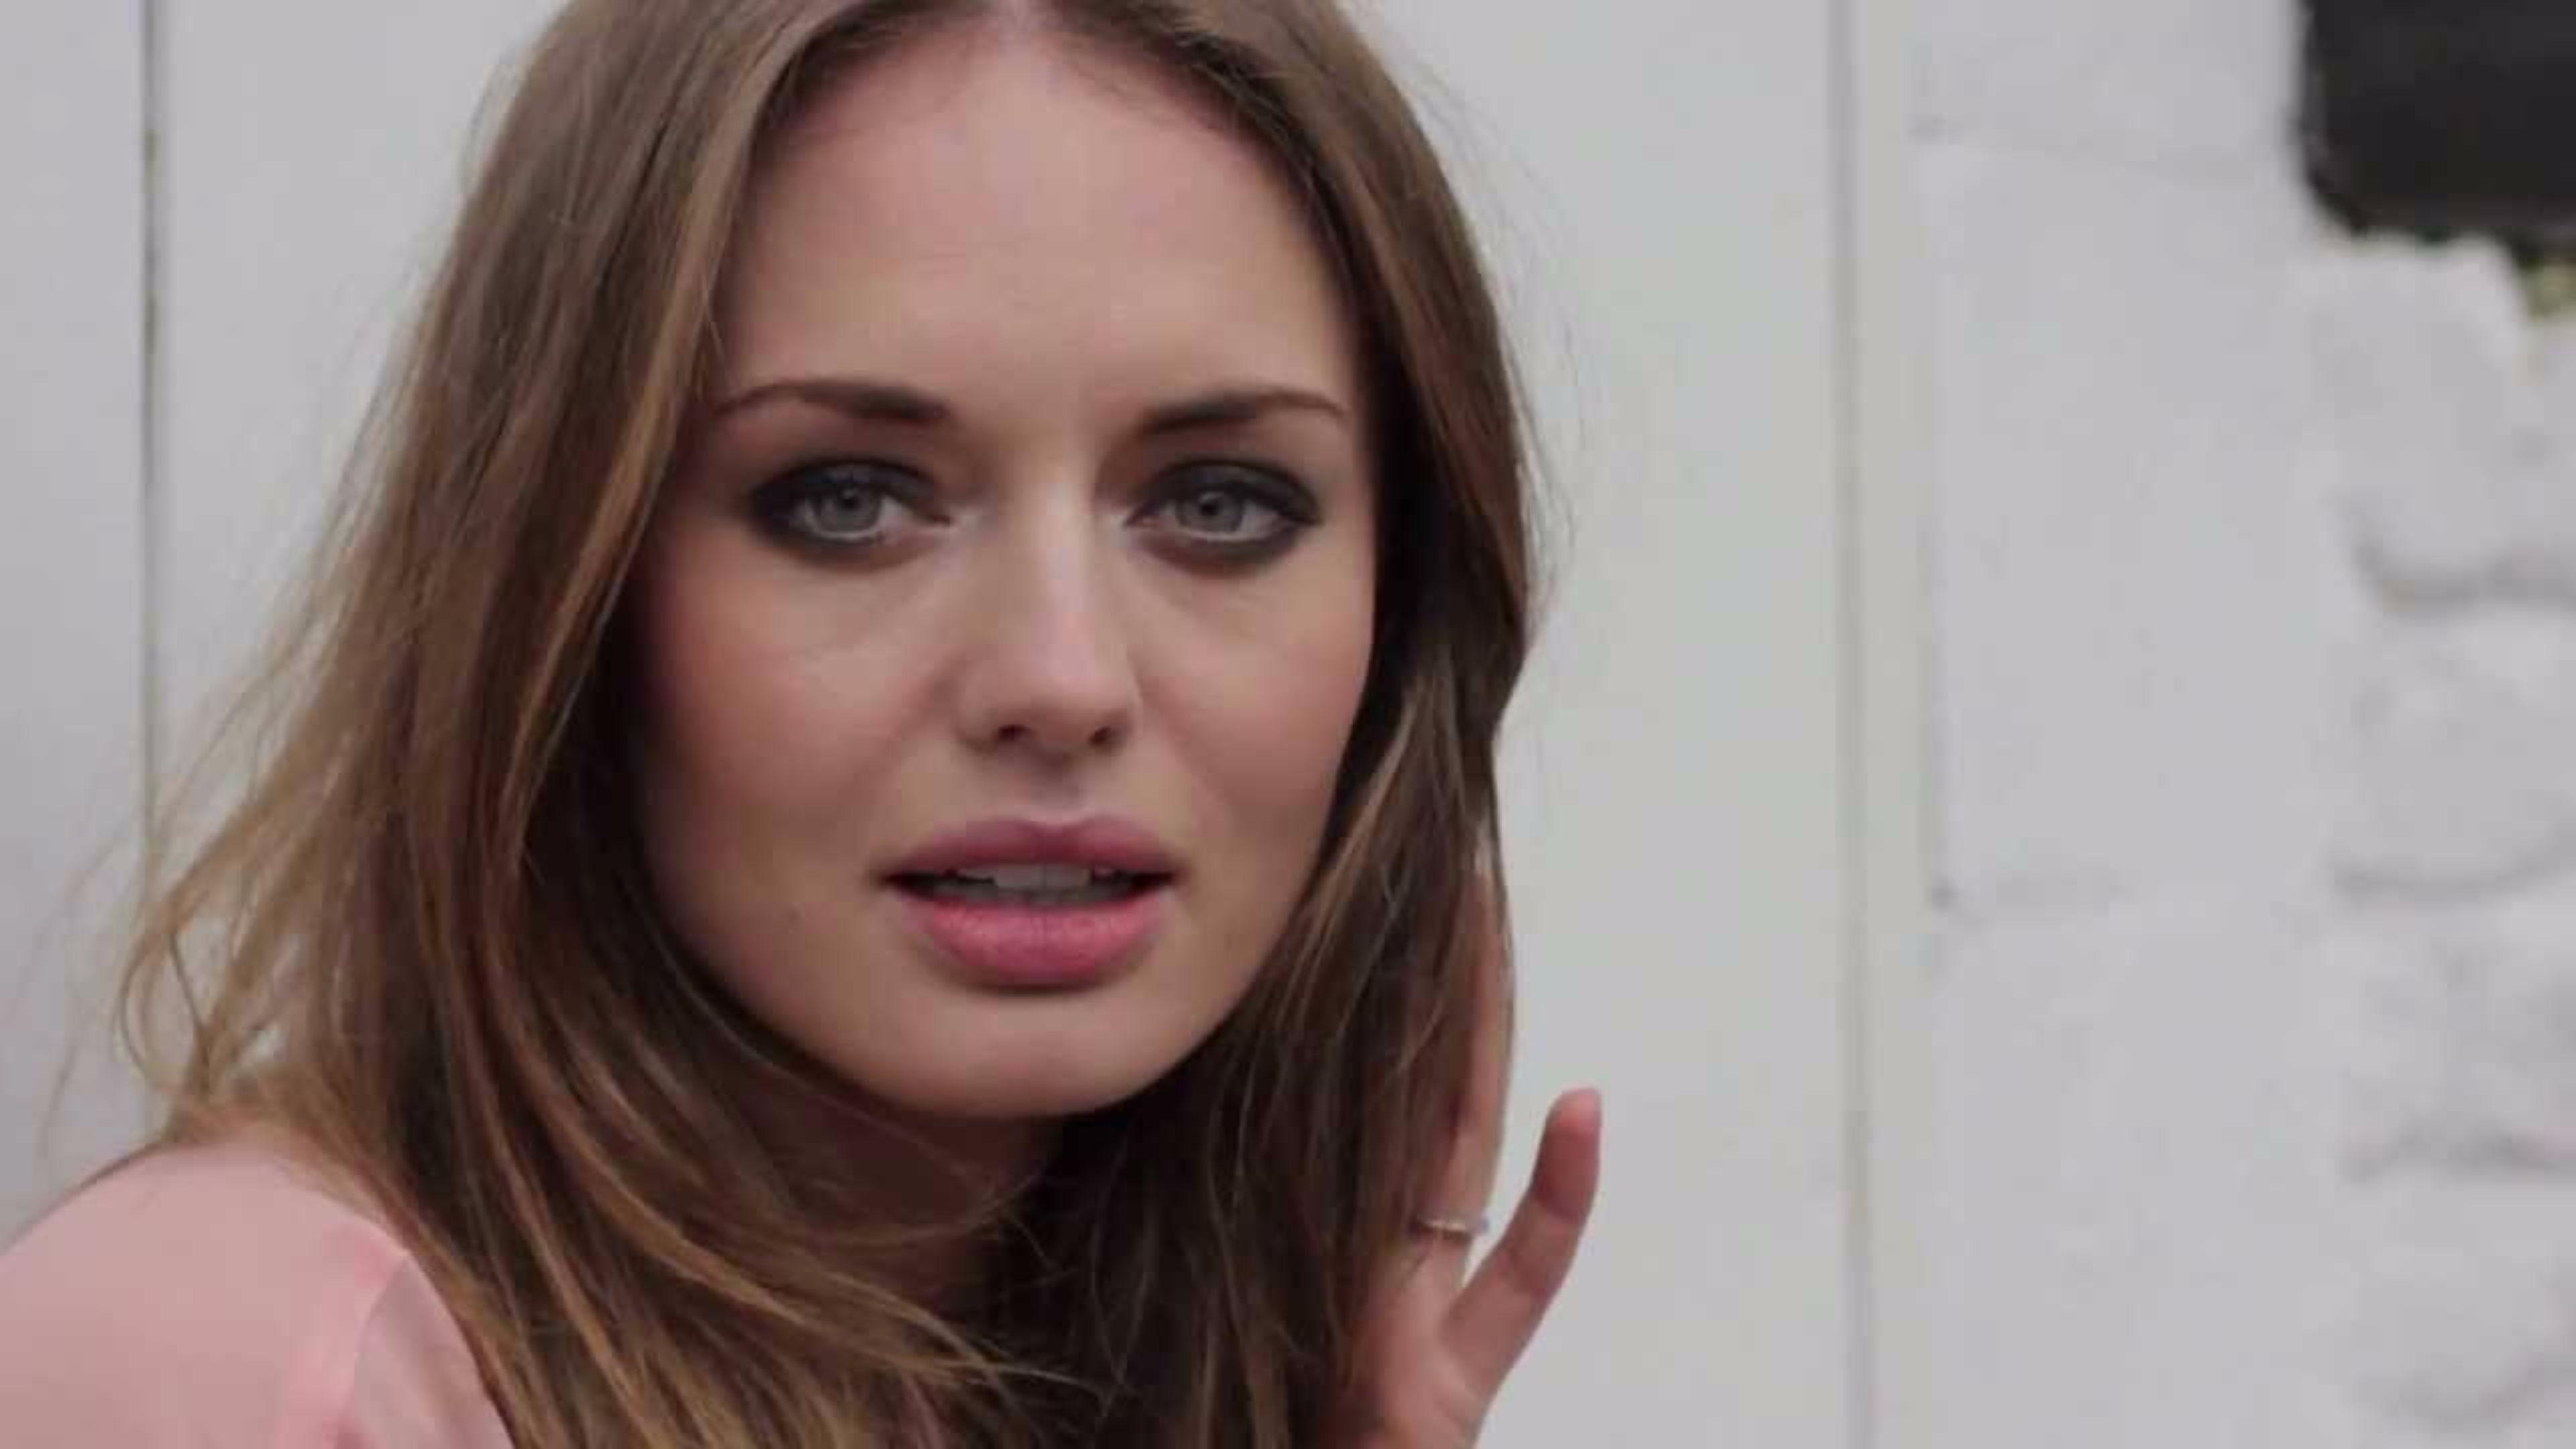 Laura Haddock Wallpaper Image Photo Picture Background